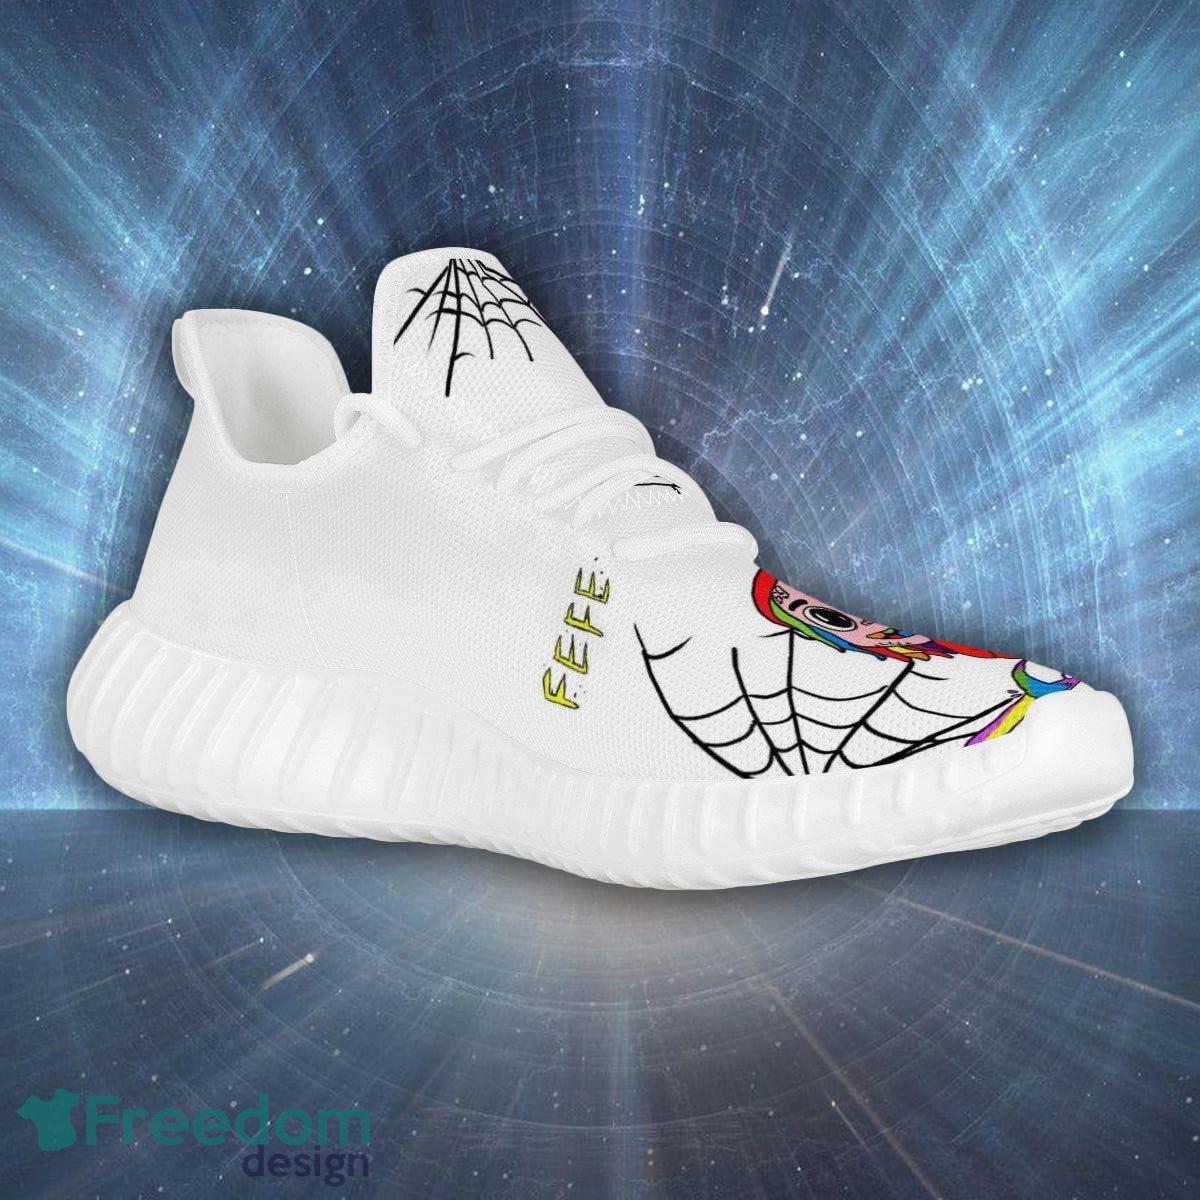 Sport Sneakers Sixnine Design Yeezy Shoes For Men And Women - Freedomdesign